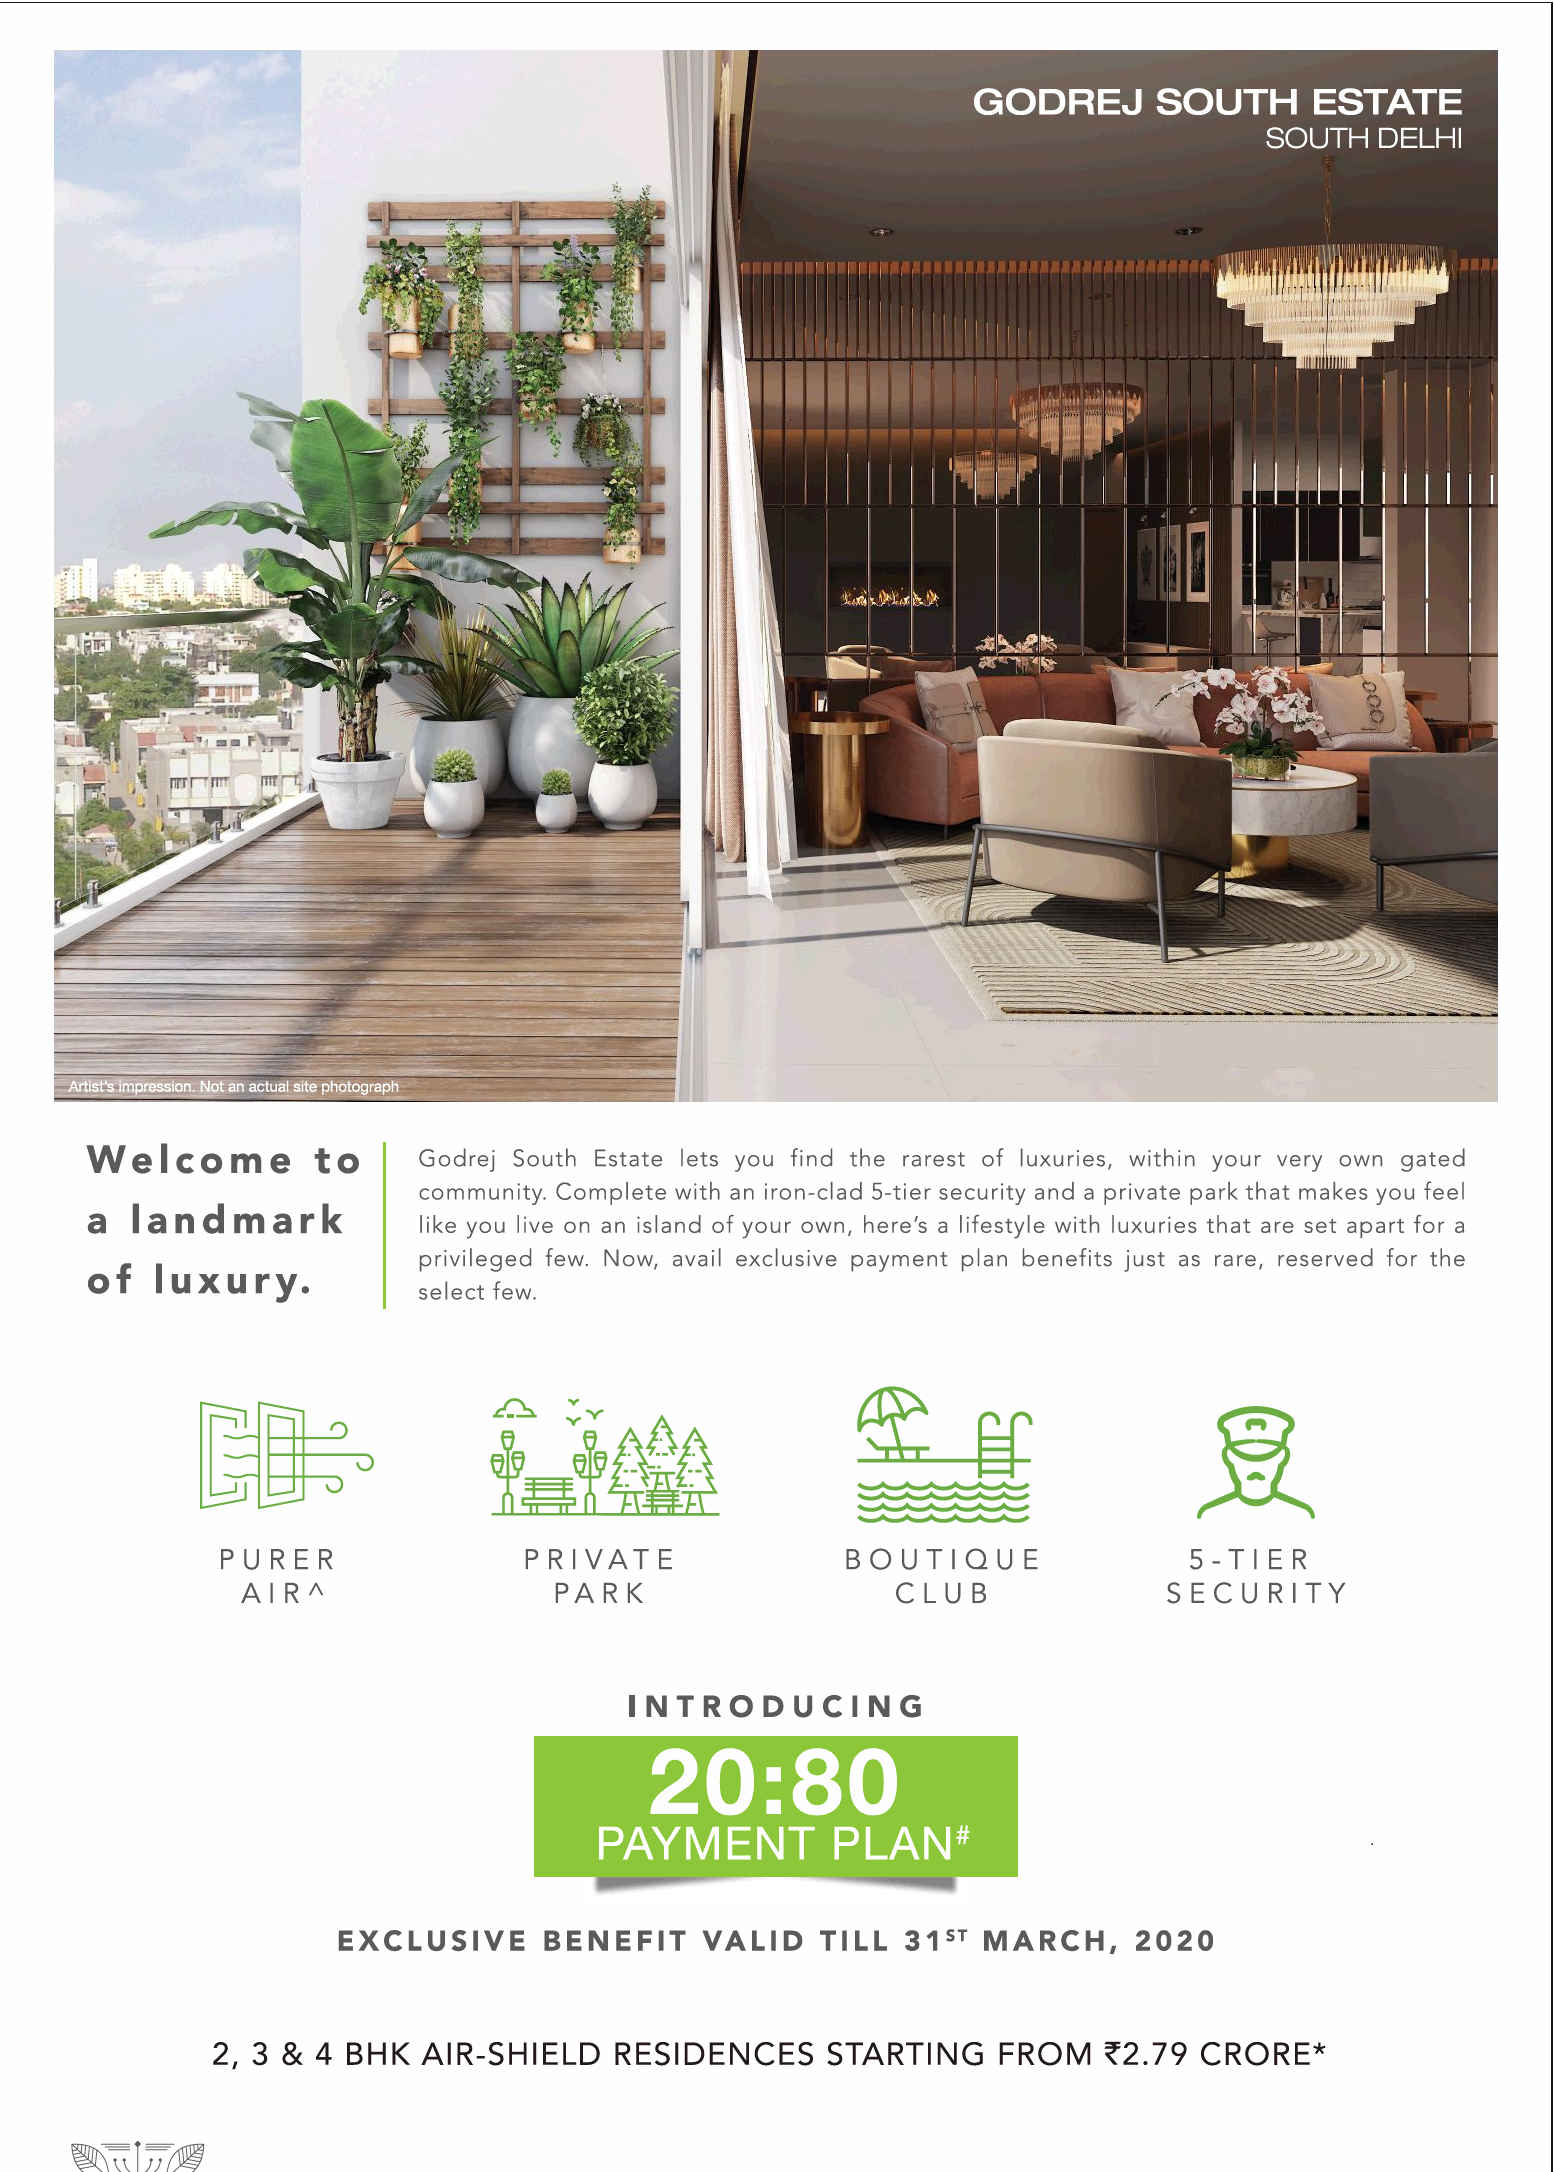 Introducing 20:80 payment plan at Godrej South Estate in New Delhi Update